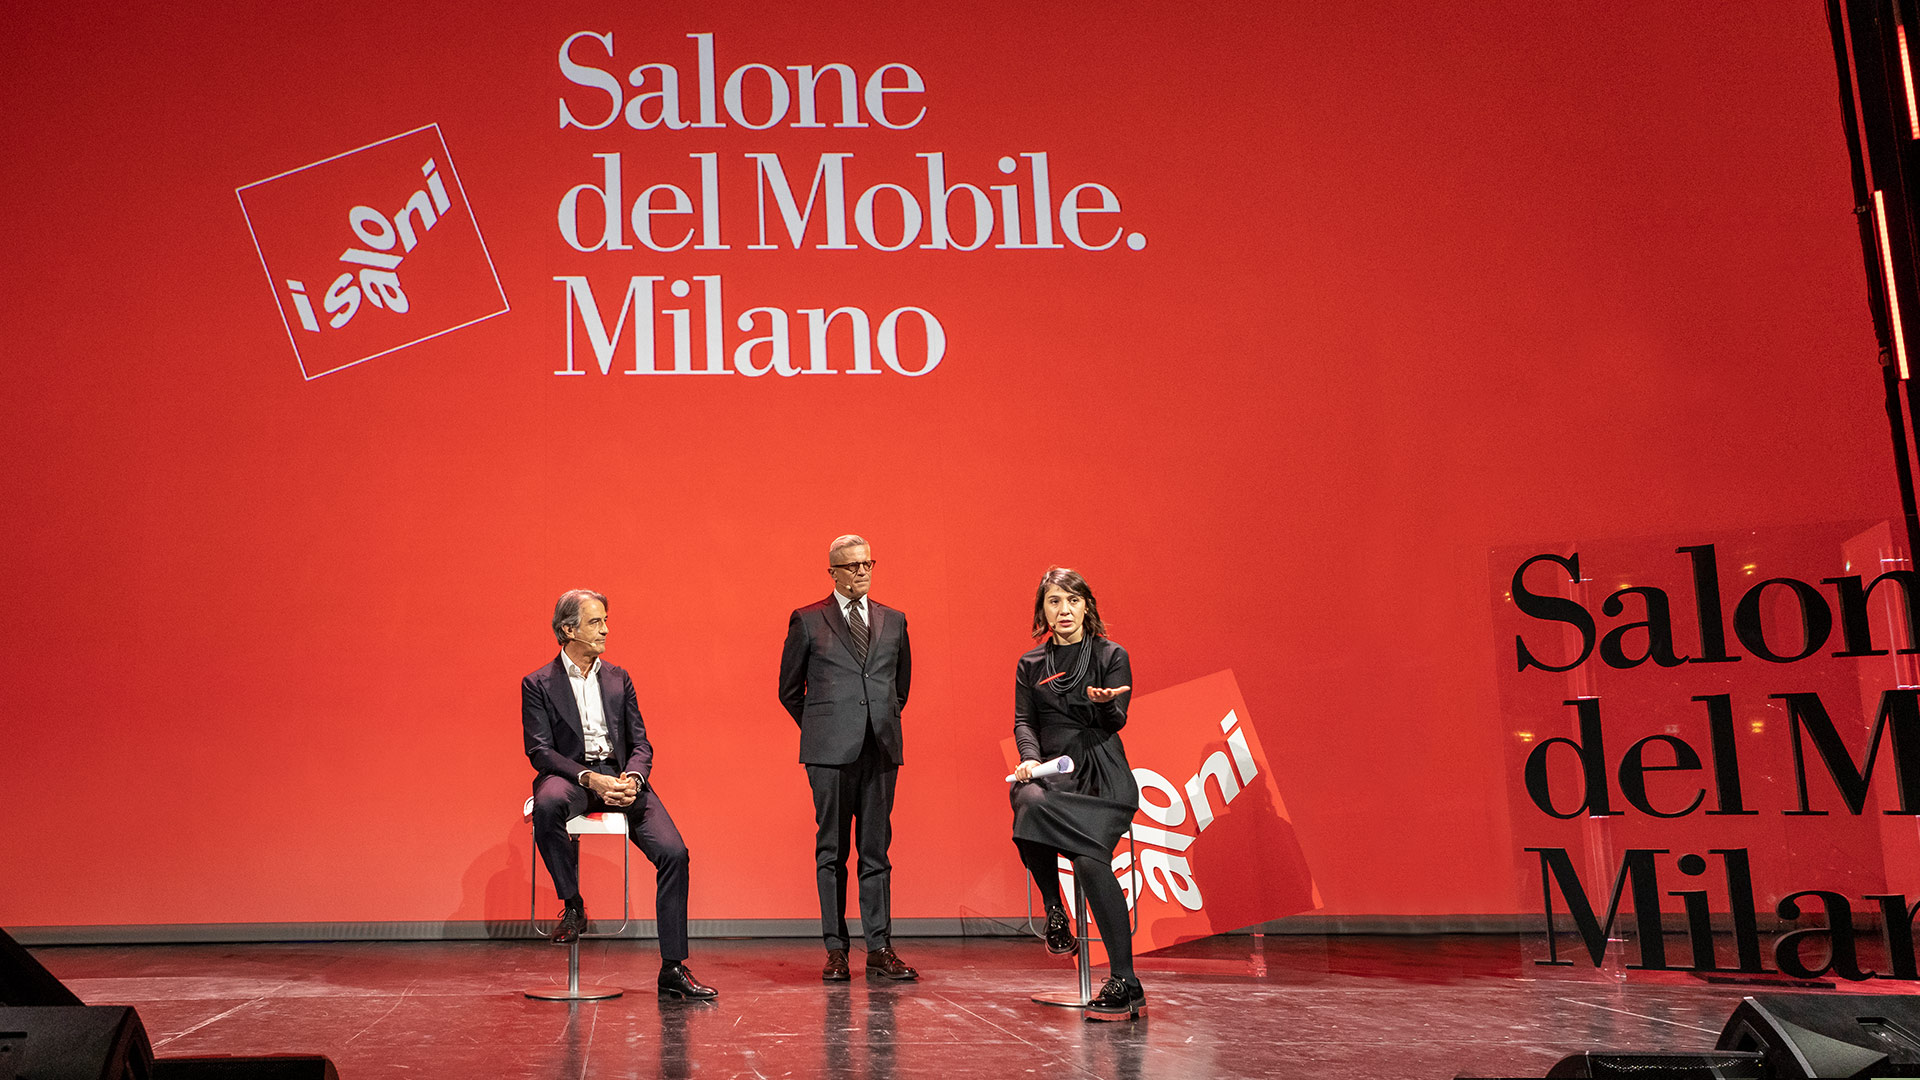 The Salone del Mobile 2022 explained by President Maria Porro